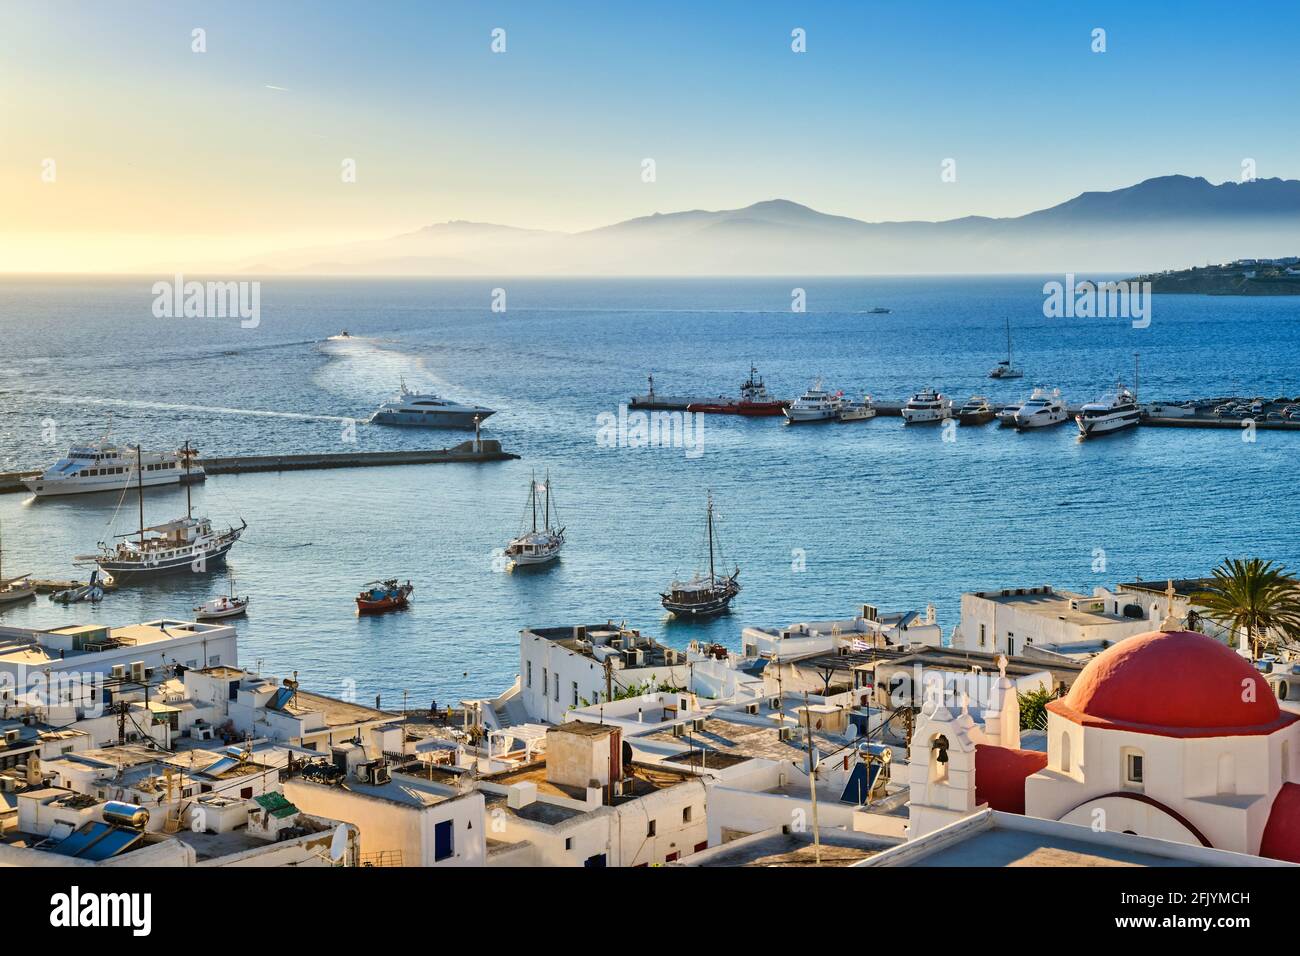 Beautiful view of Chora, Mykonos, Greece at sunset. Port, bay, boats, yachts moored by jetty. Famous whitewashed houses, white church with red dome  Stock Photo